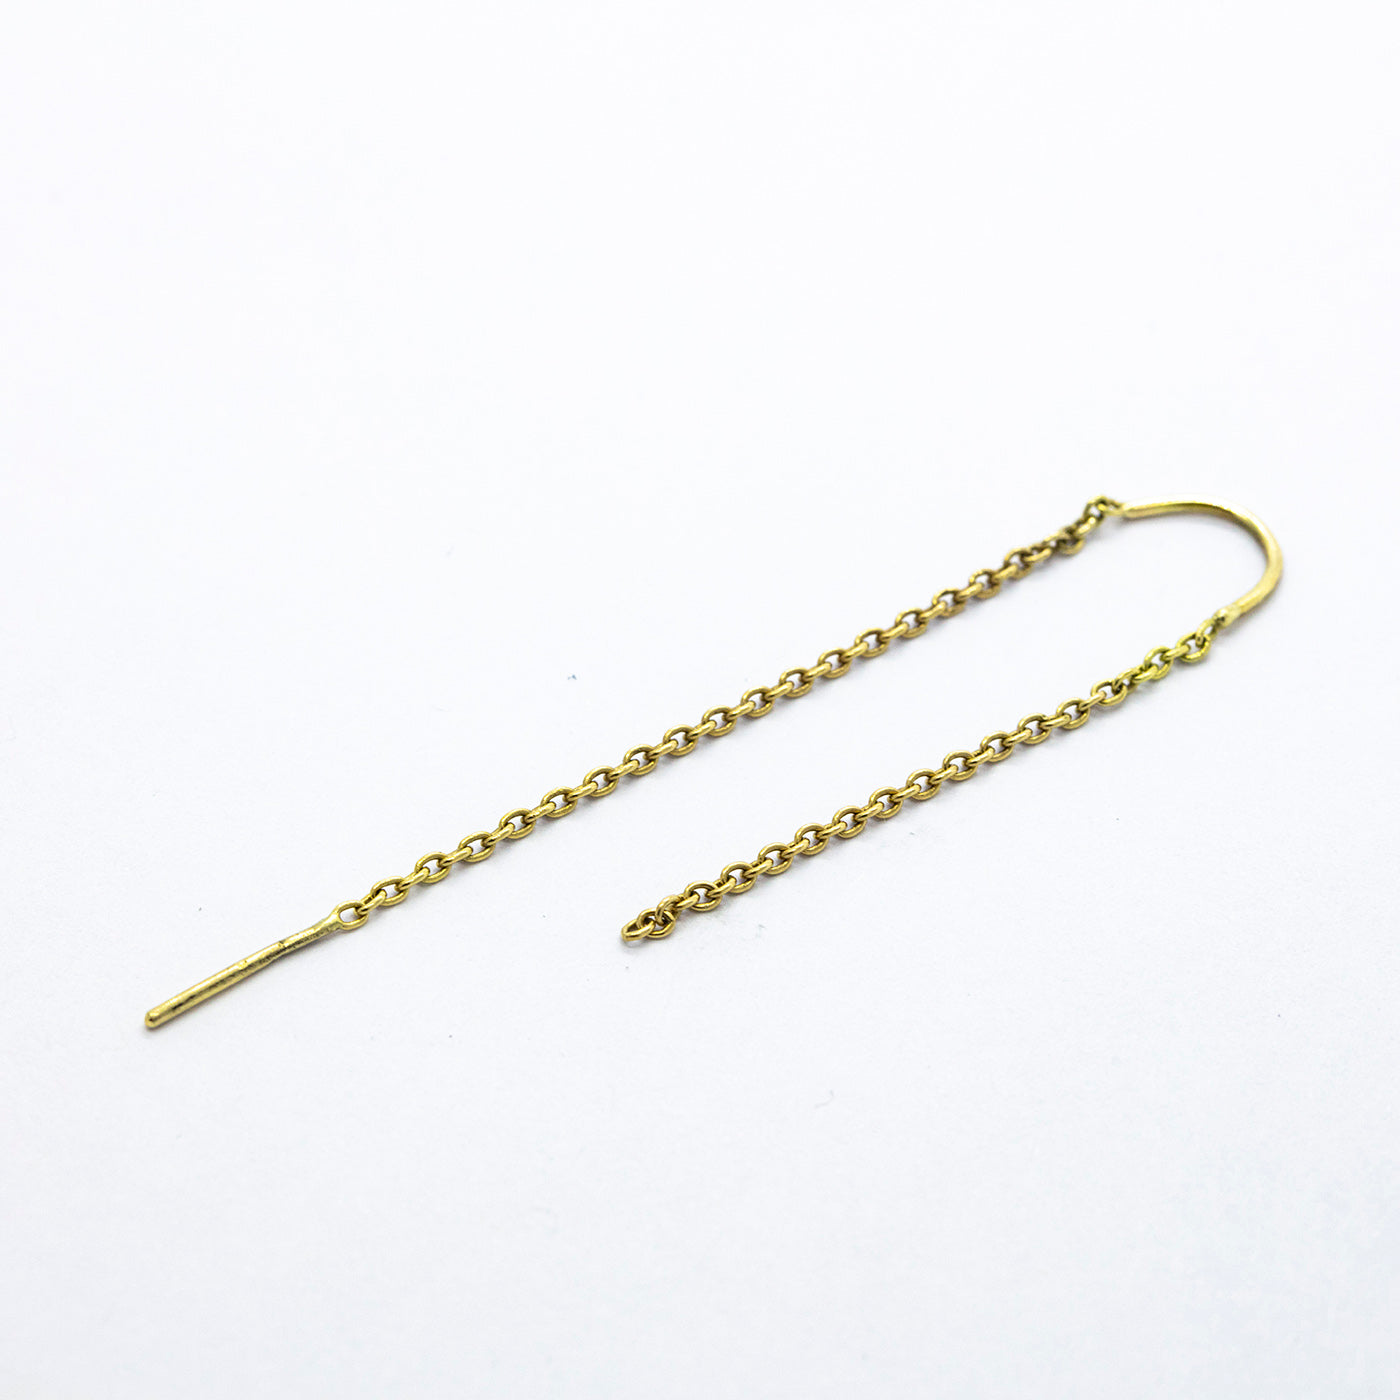 Earring Ray helix cartilage piercing chain 18ct yellow gold product view innan jewellery independent atelier berlin